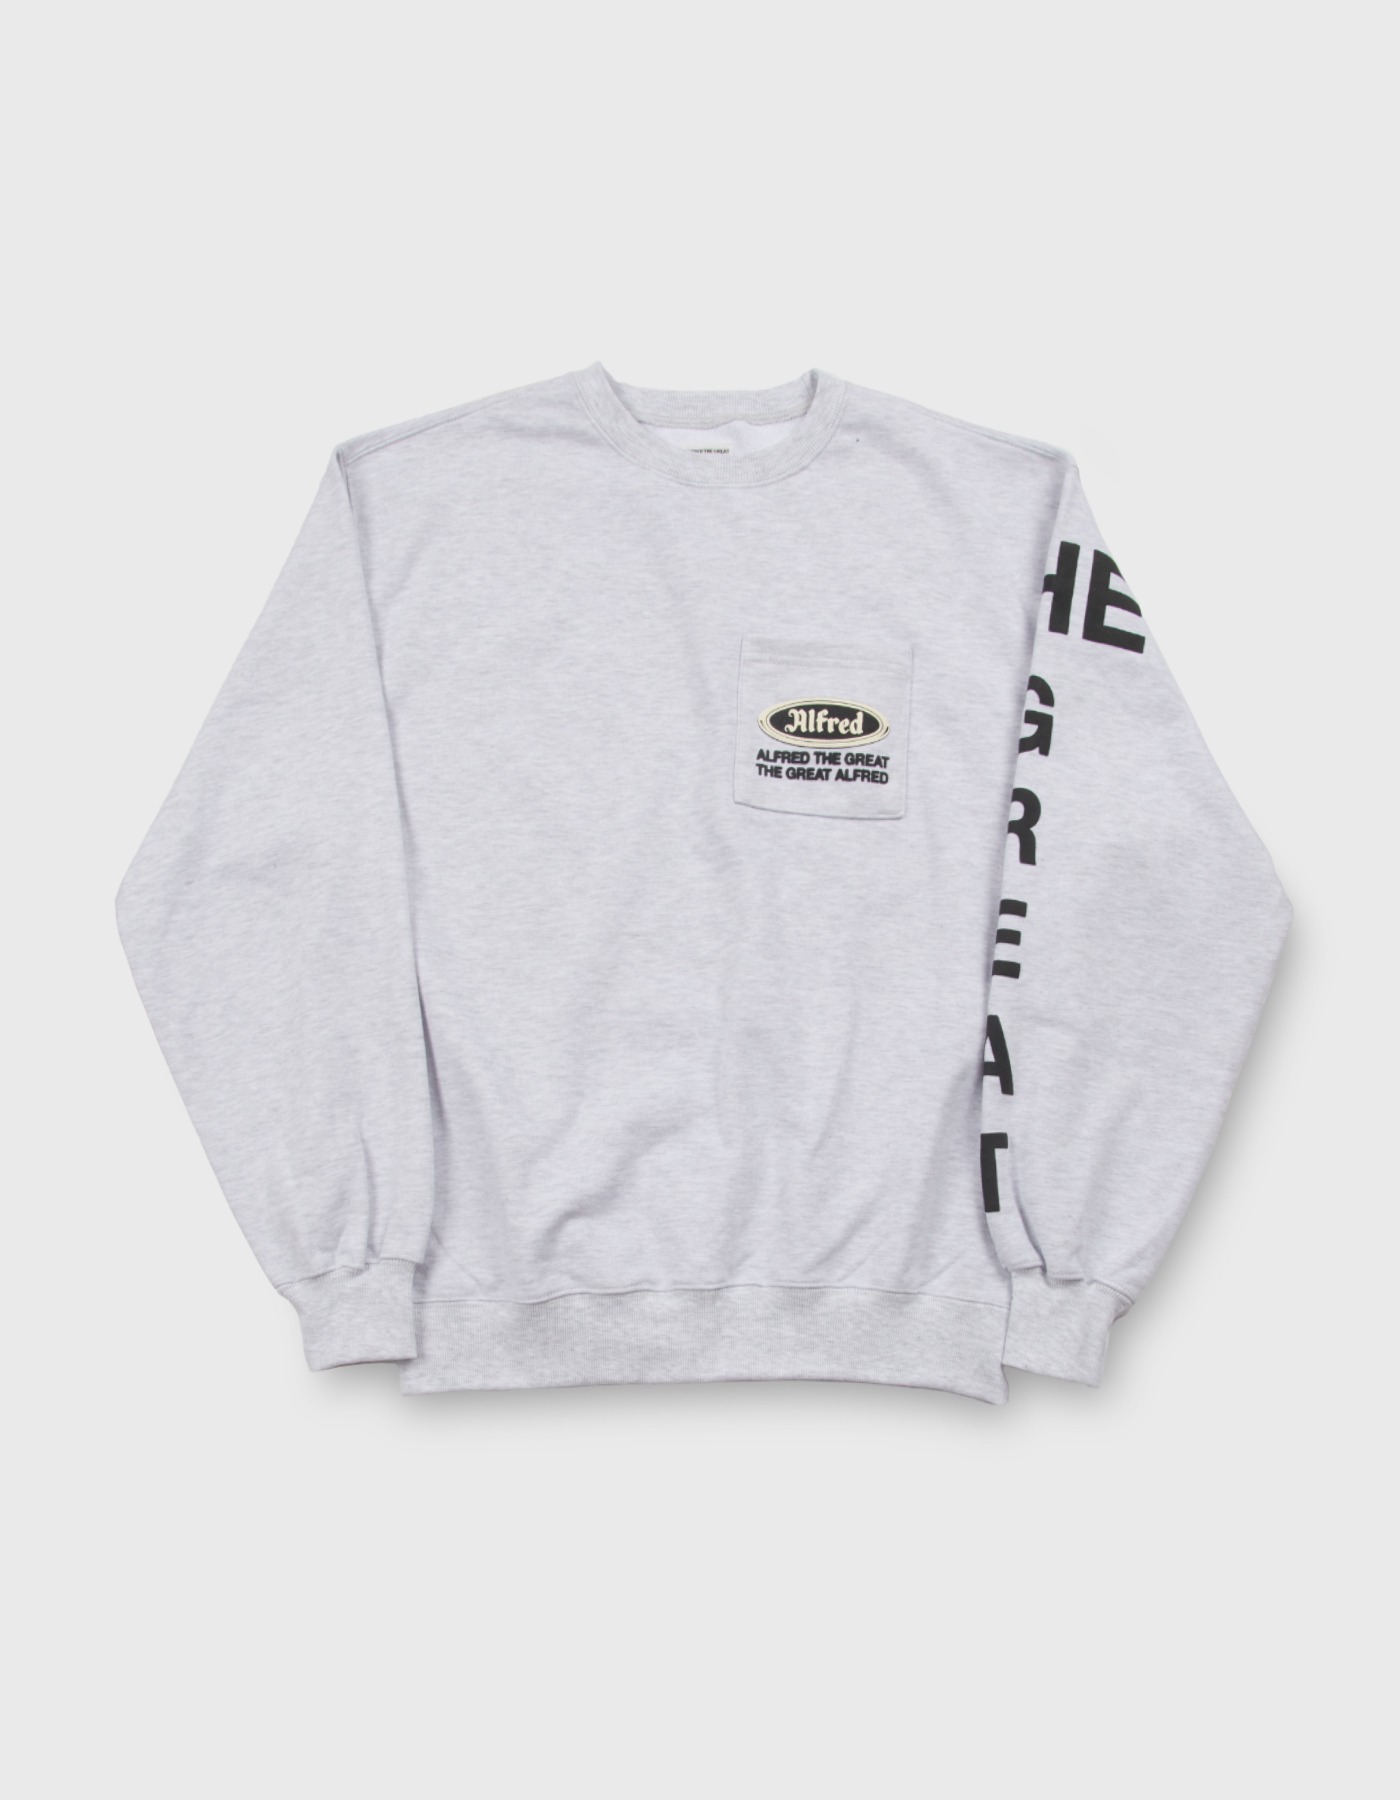 FRED THE GREAT CREWNECK / M.grey(1%)